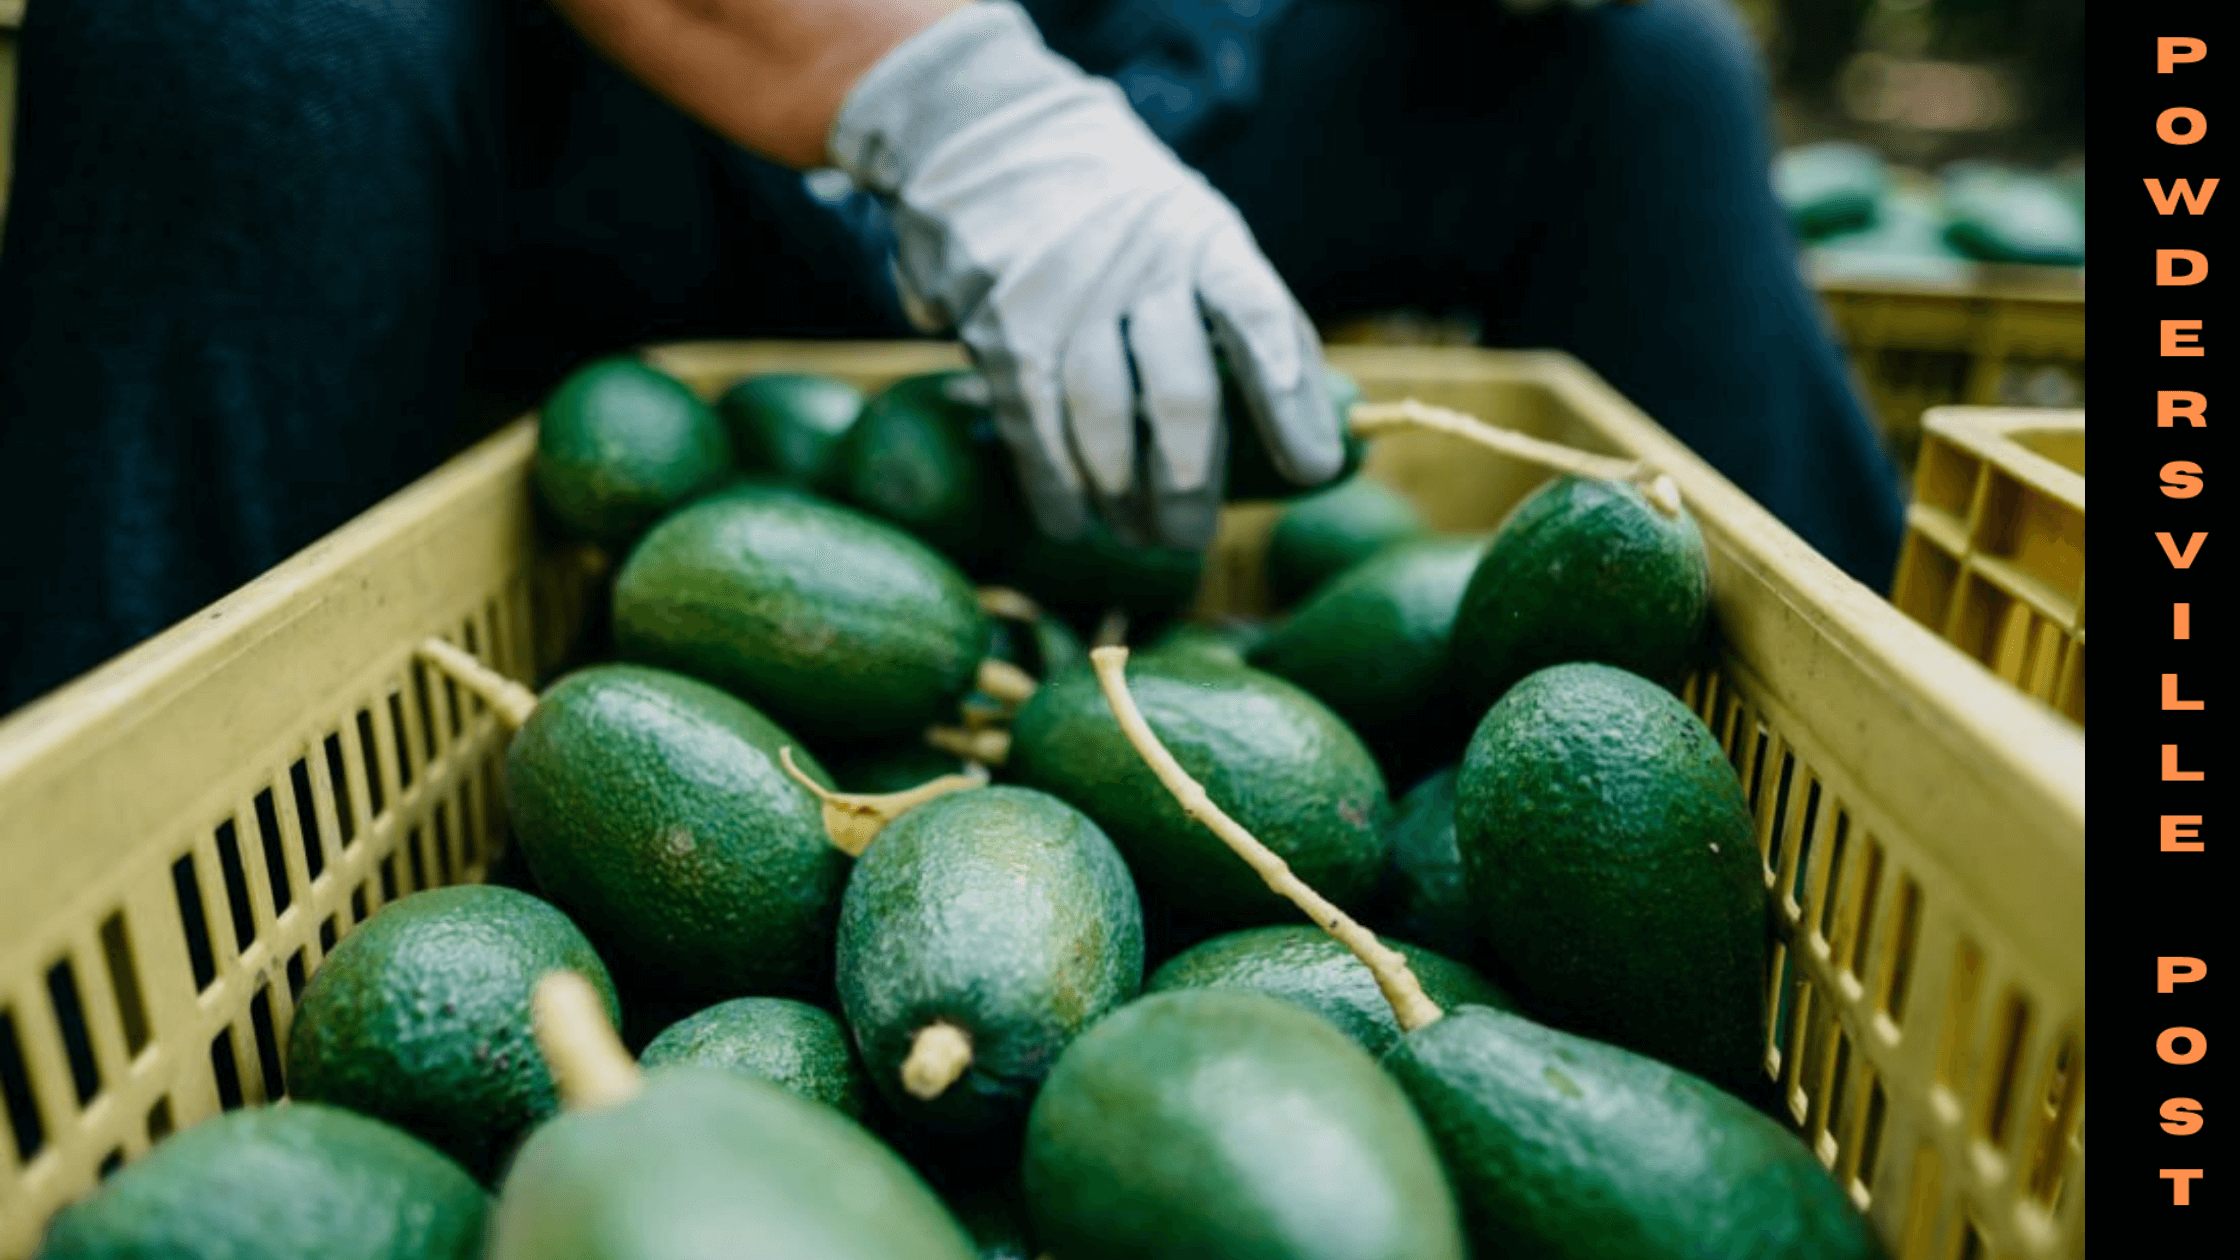 The-Forbidding-Adjournment-Of-Avocado-Import-From-Mexico-To-The-US